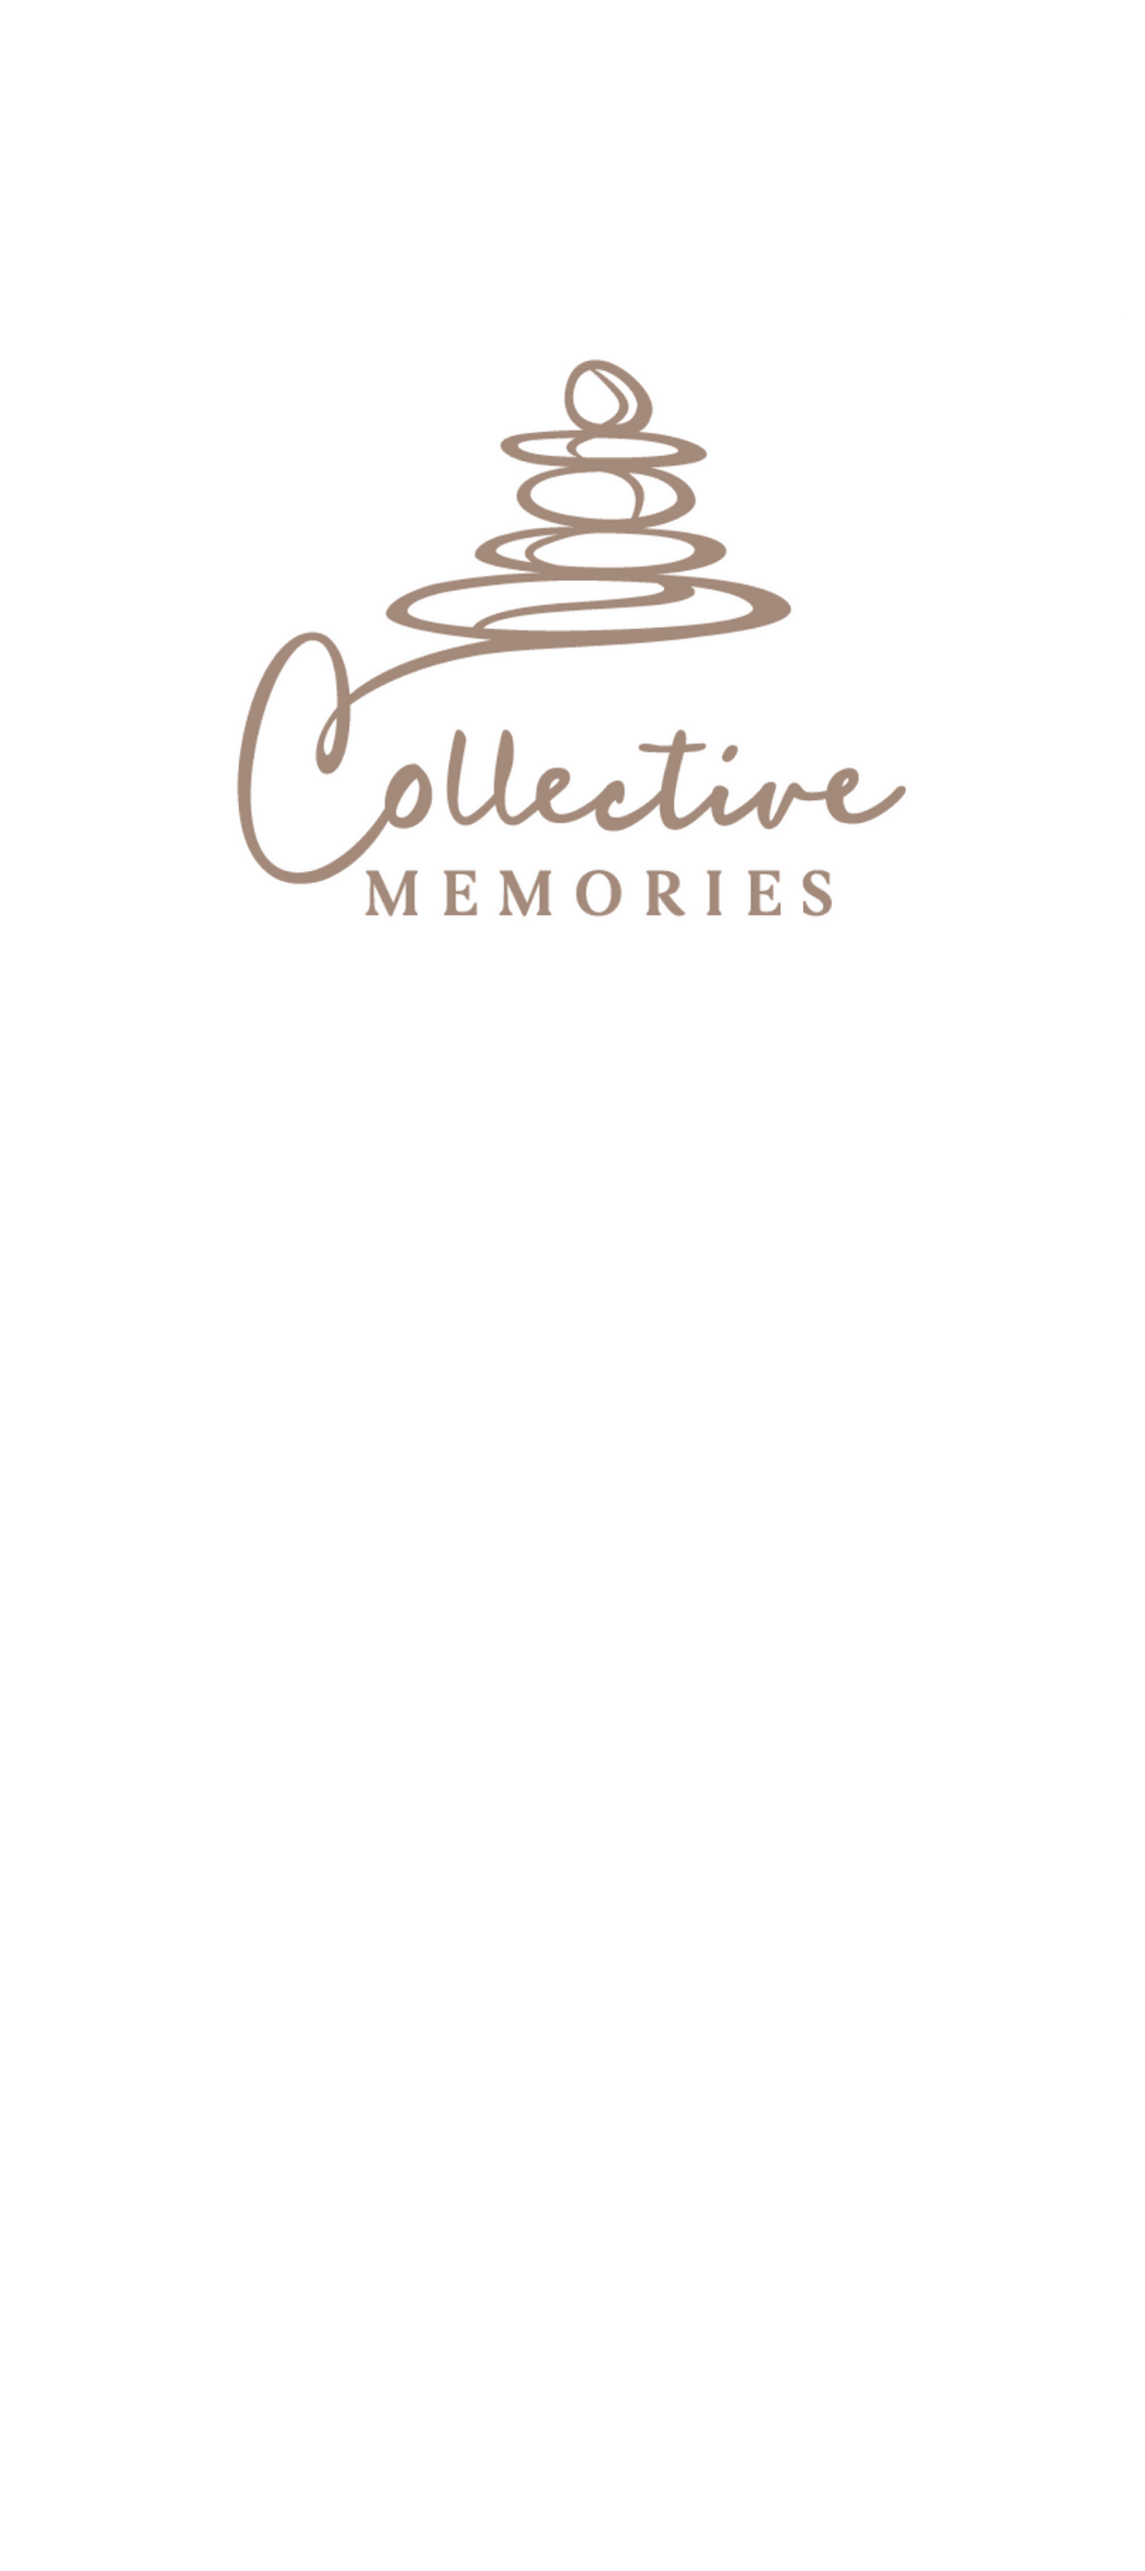 Collective Memories - A DR Care Solutions Partner